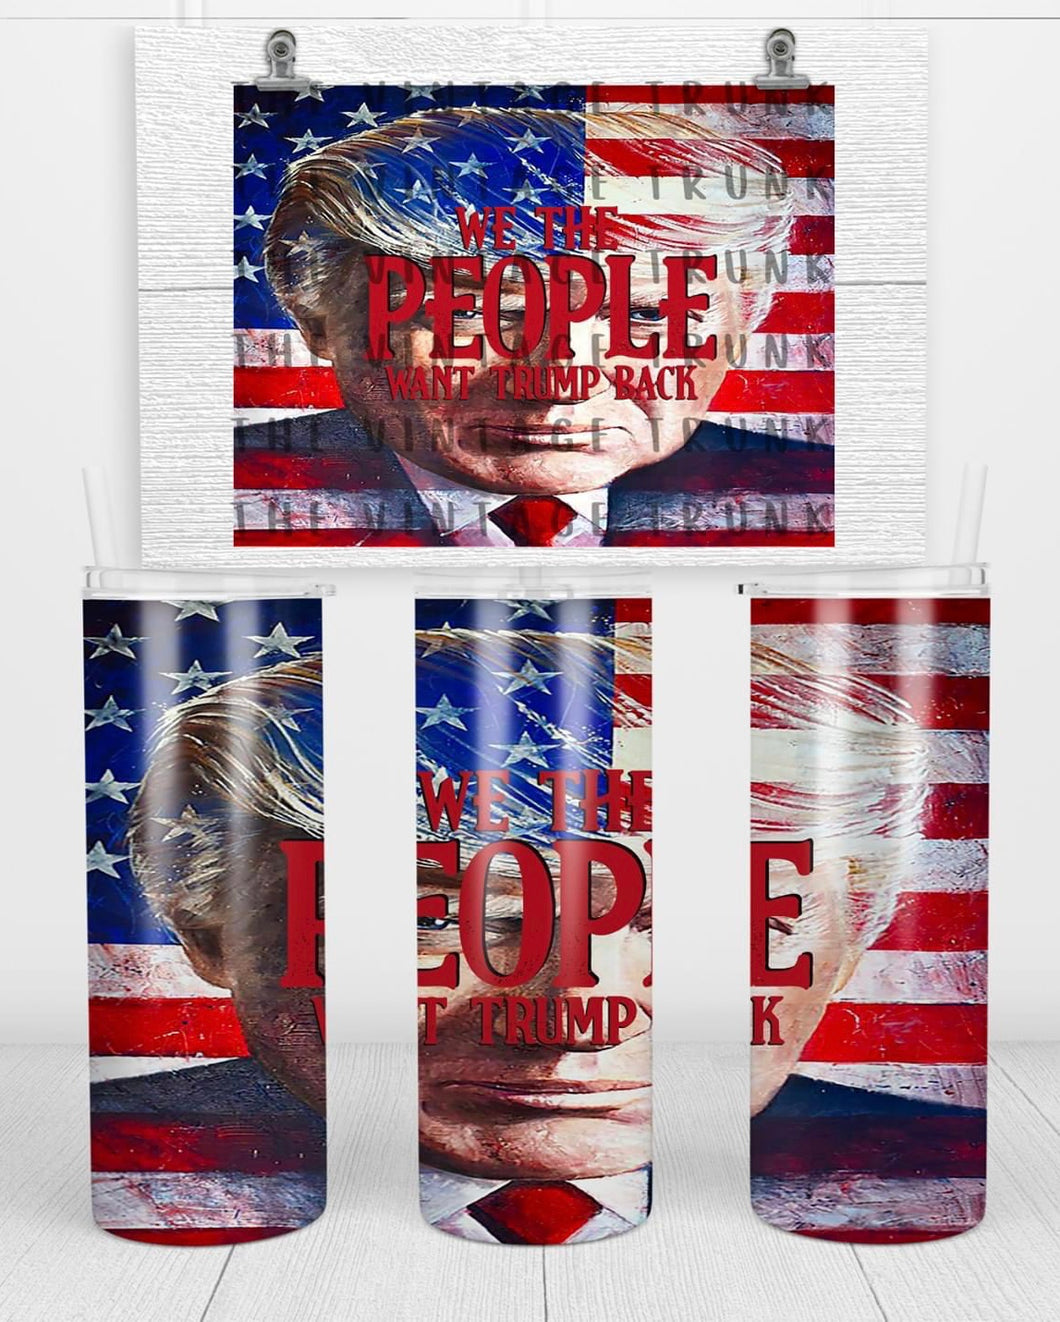 We the people want TRUMP back tumbler